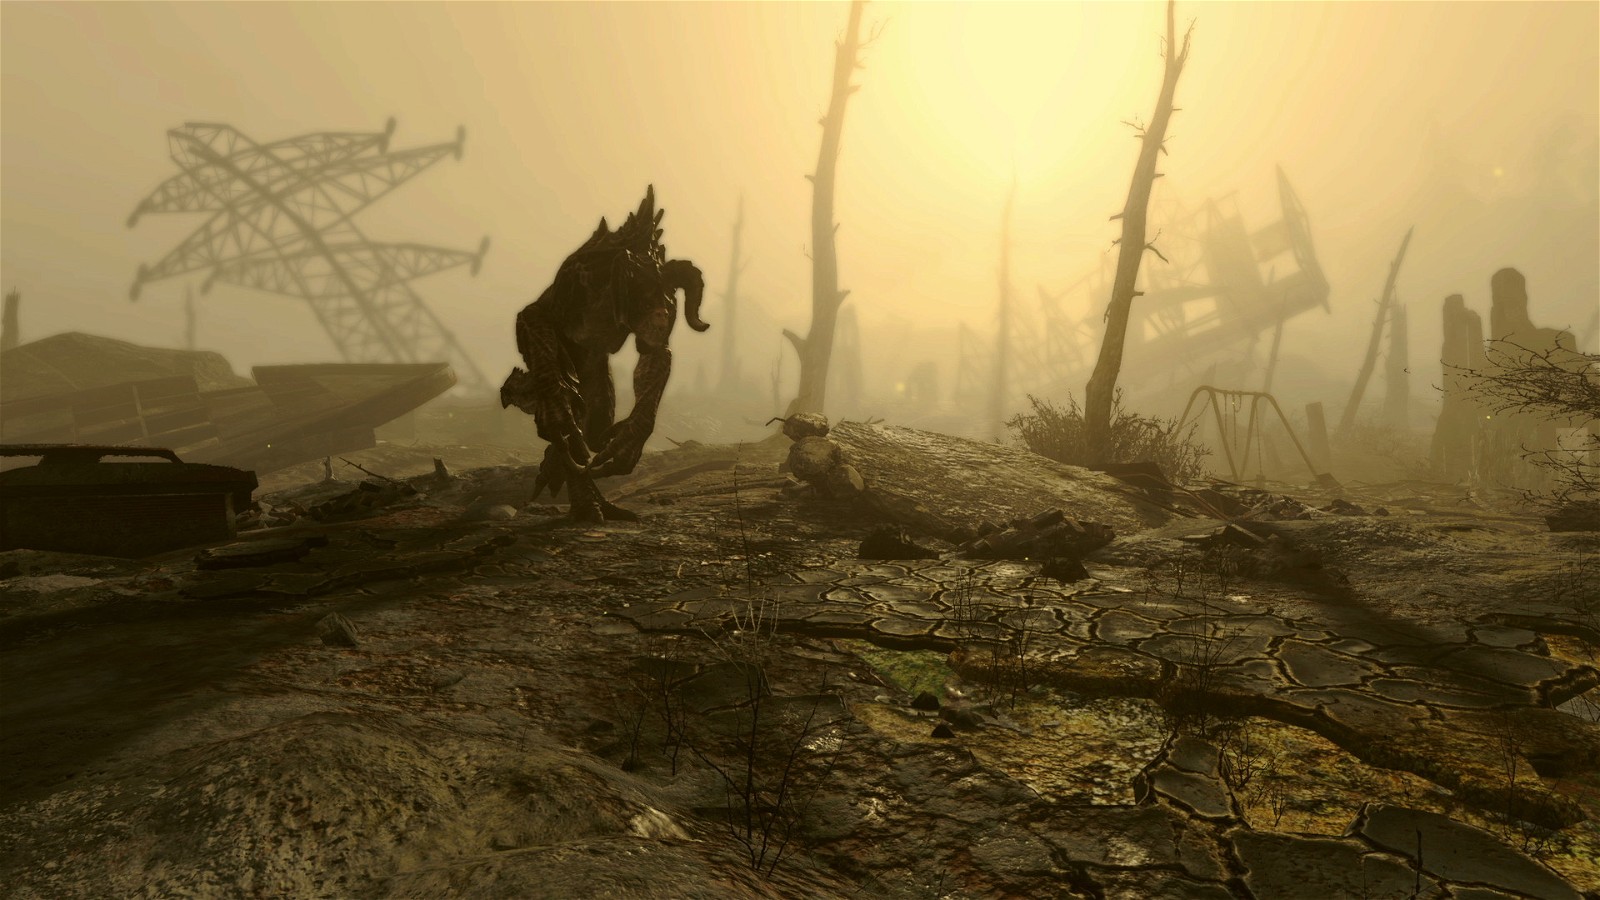 A Twitter user claims Bethesda had mapped out New York for Fallout 4's setting, but plans changed | Bethesda